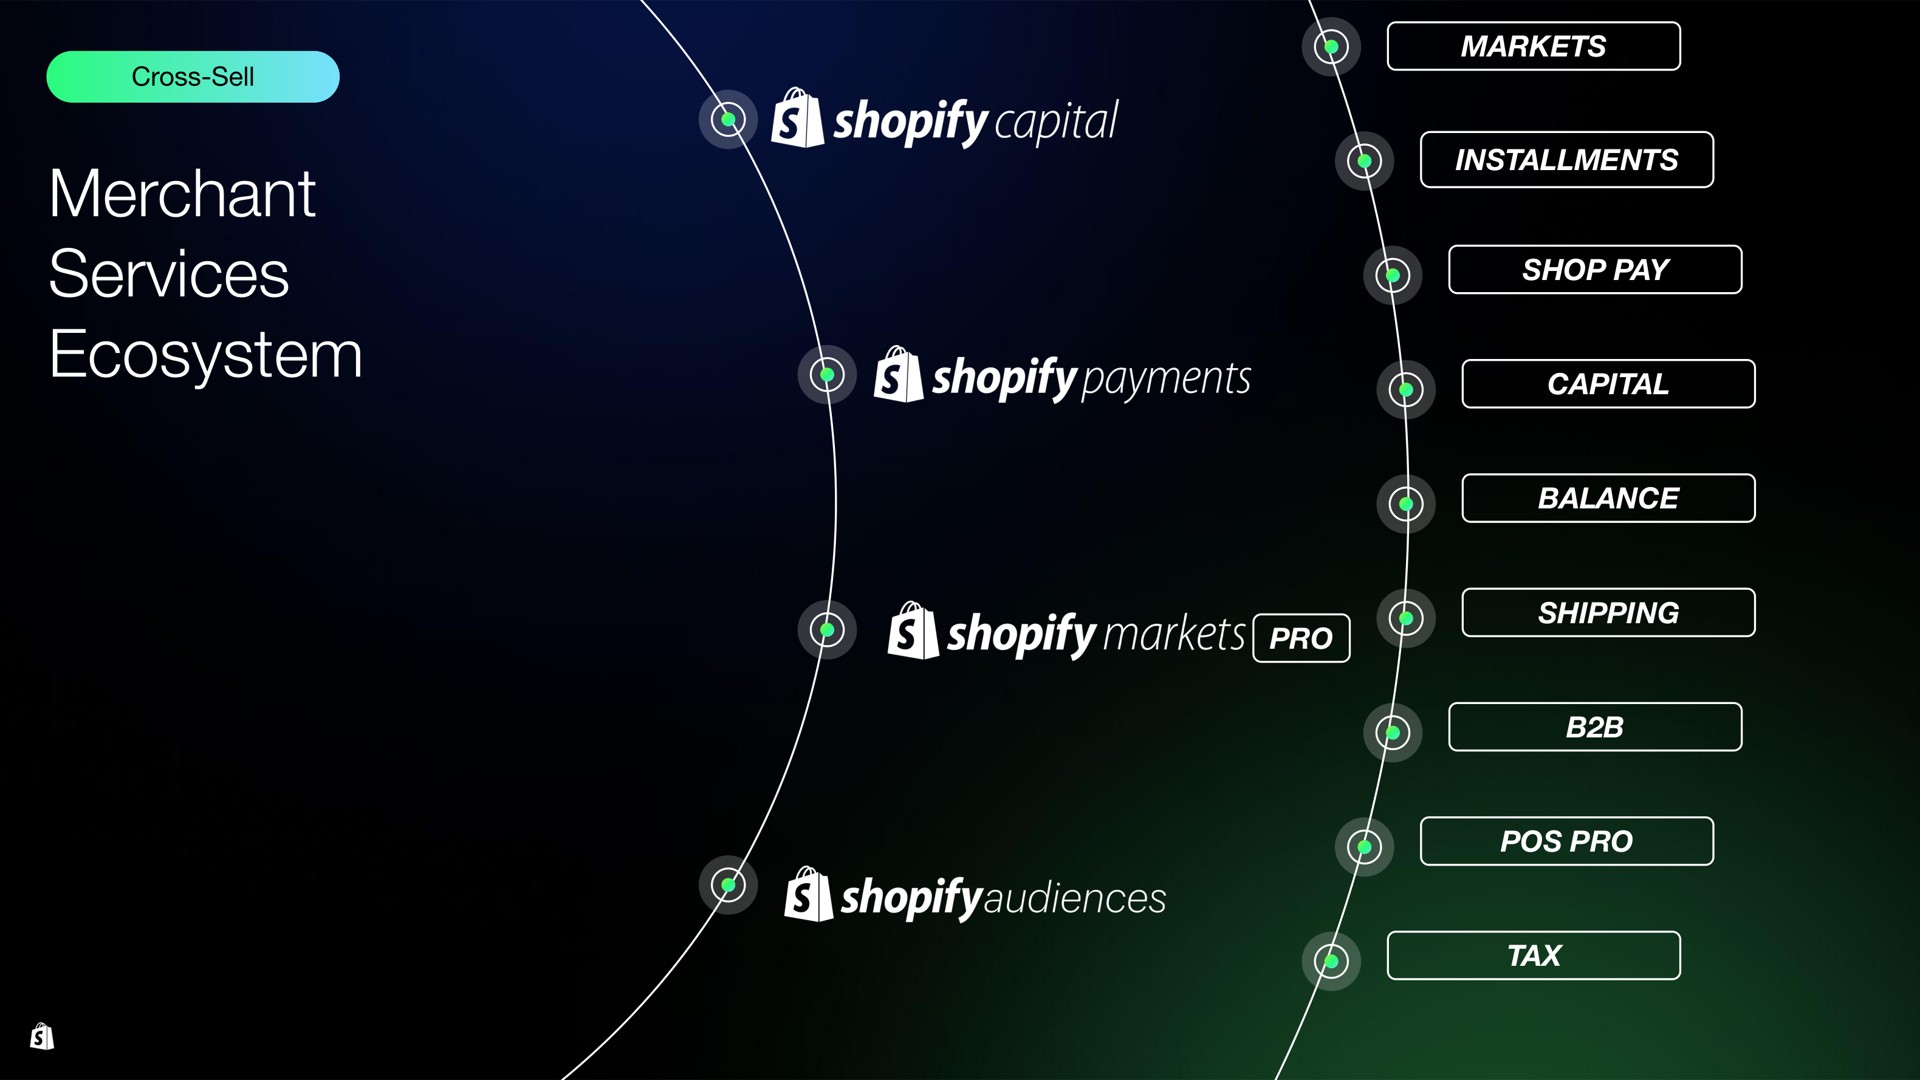 merchant services ecosystem a capital is airy markets | Shopify